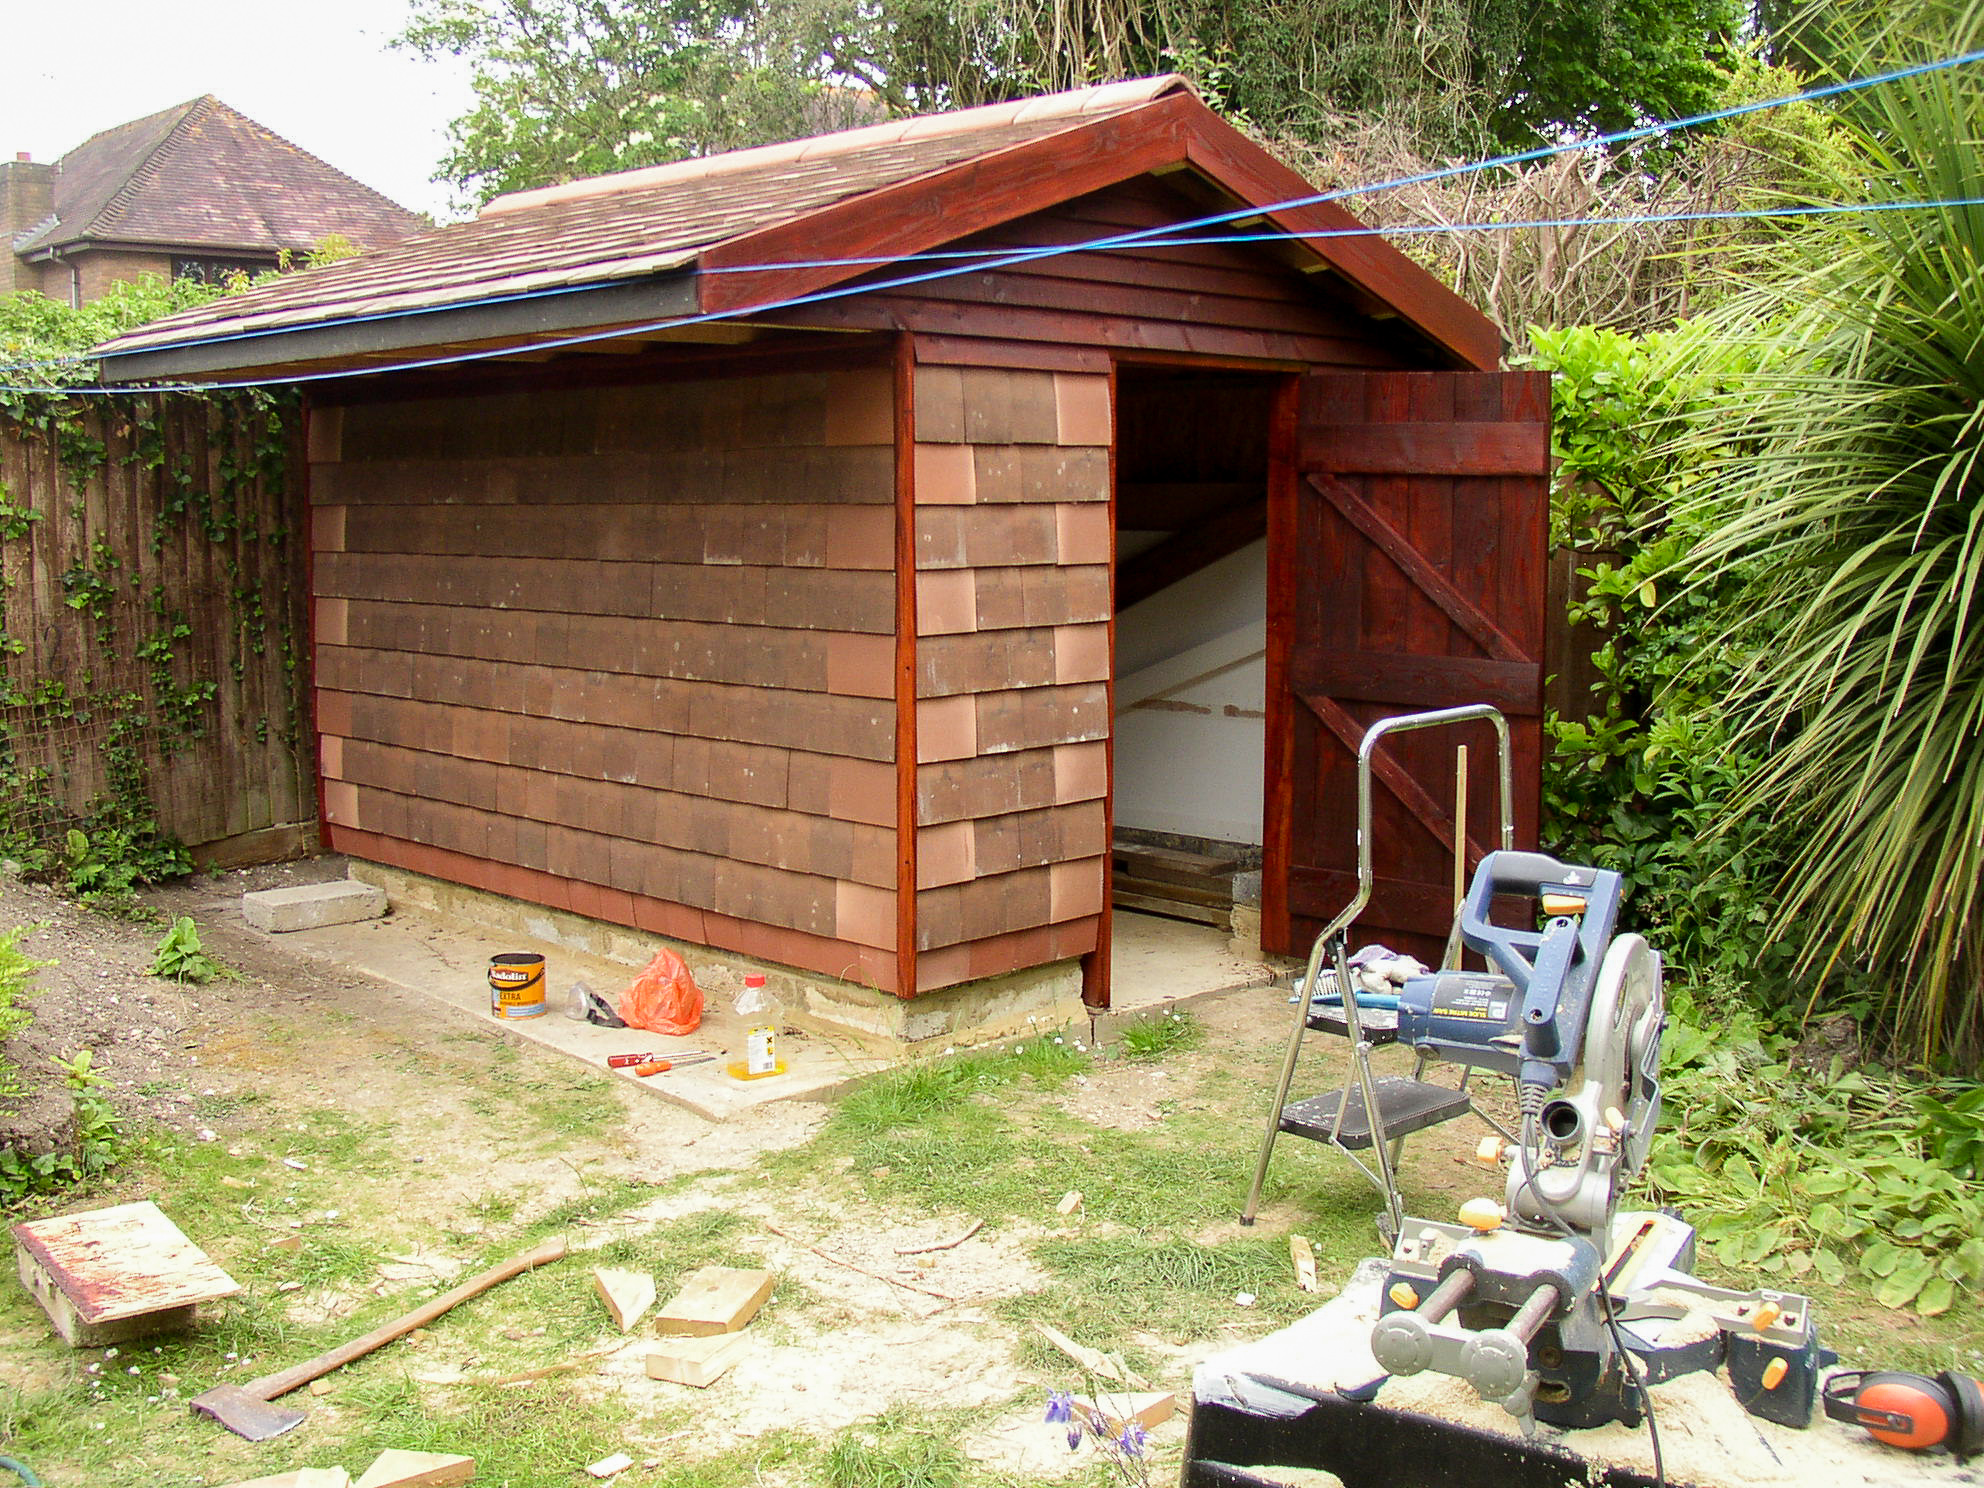 Building a Recycled Shed